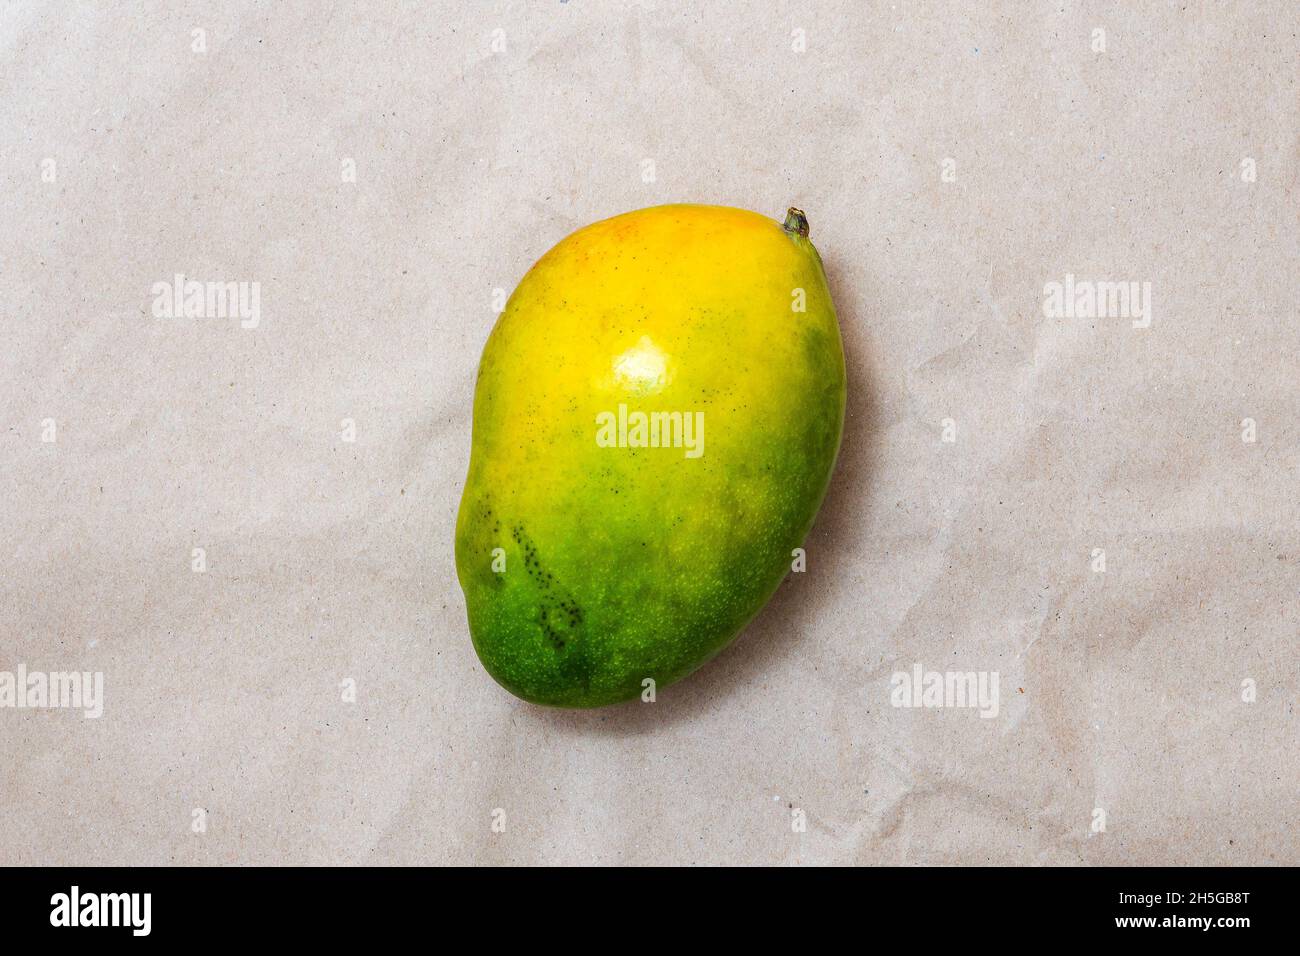 Ripe green and yellow mango fruit on brown craft paper. Top view. Stock Photo